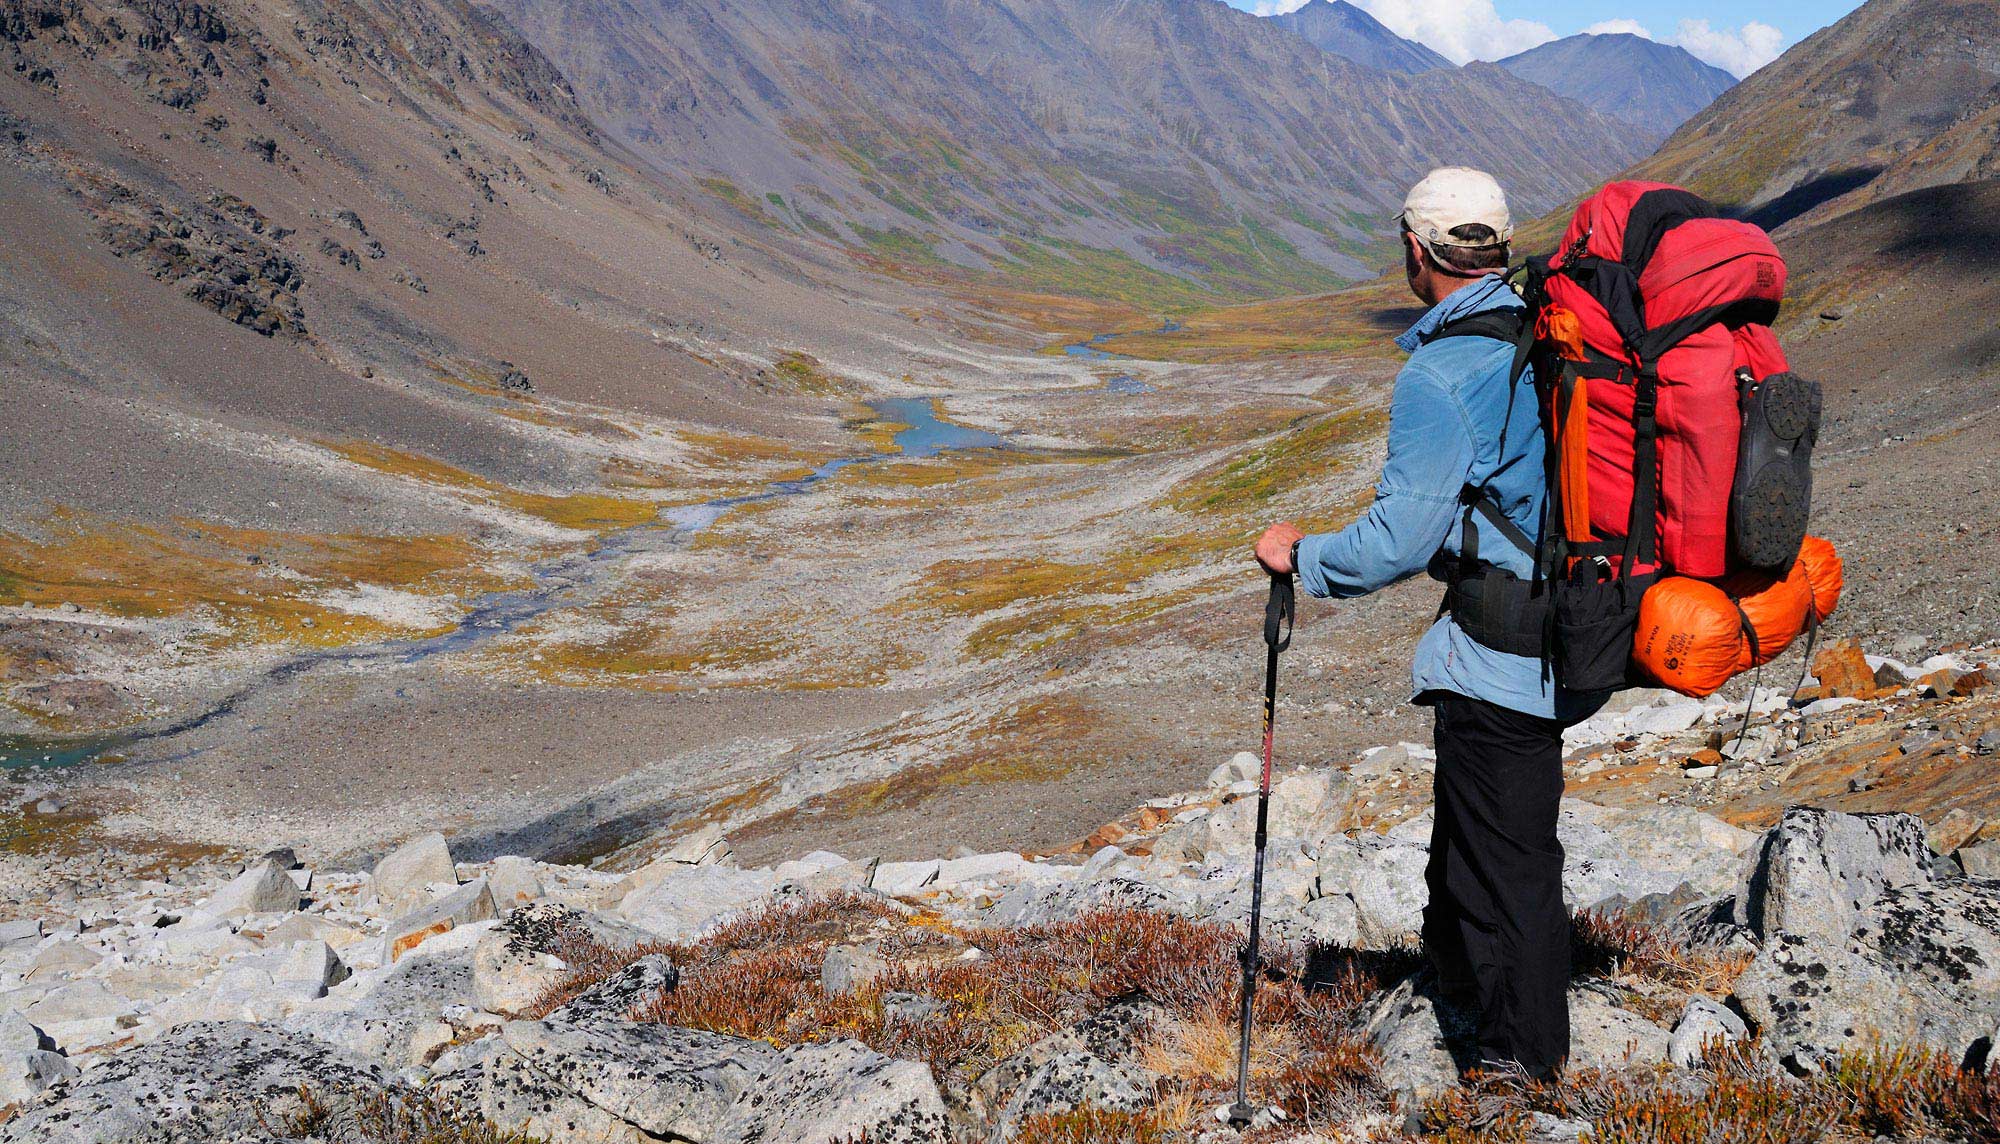 Guided Alaska ecotours and hiking trips Hiking Wrangell-St. Elias National Park